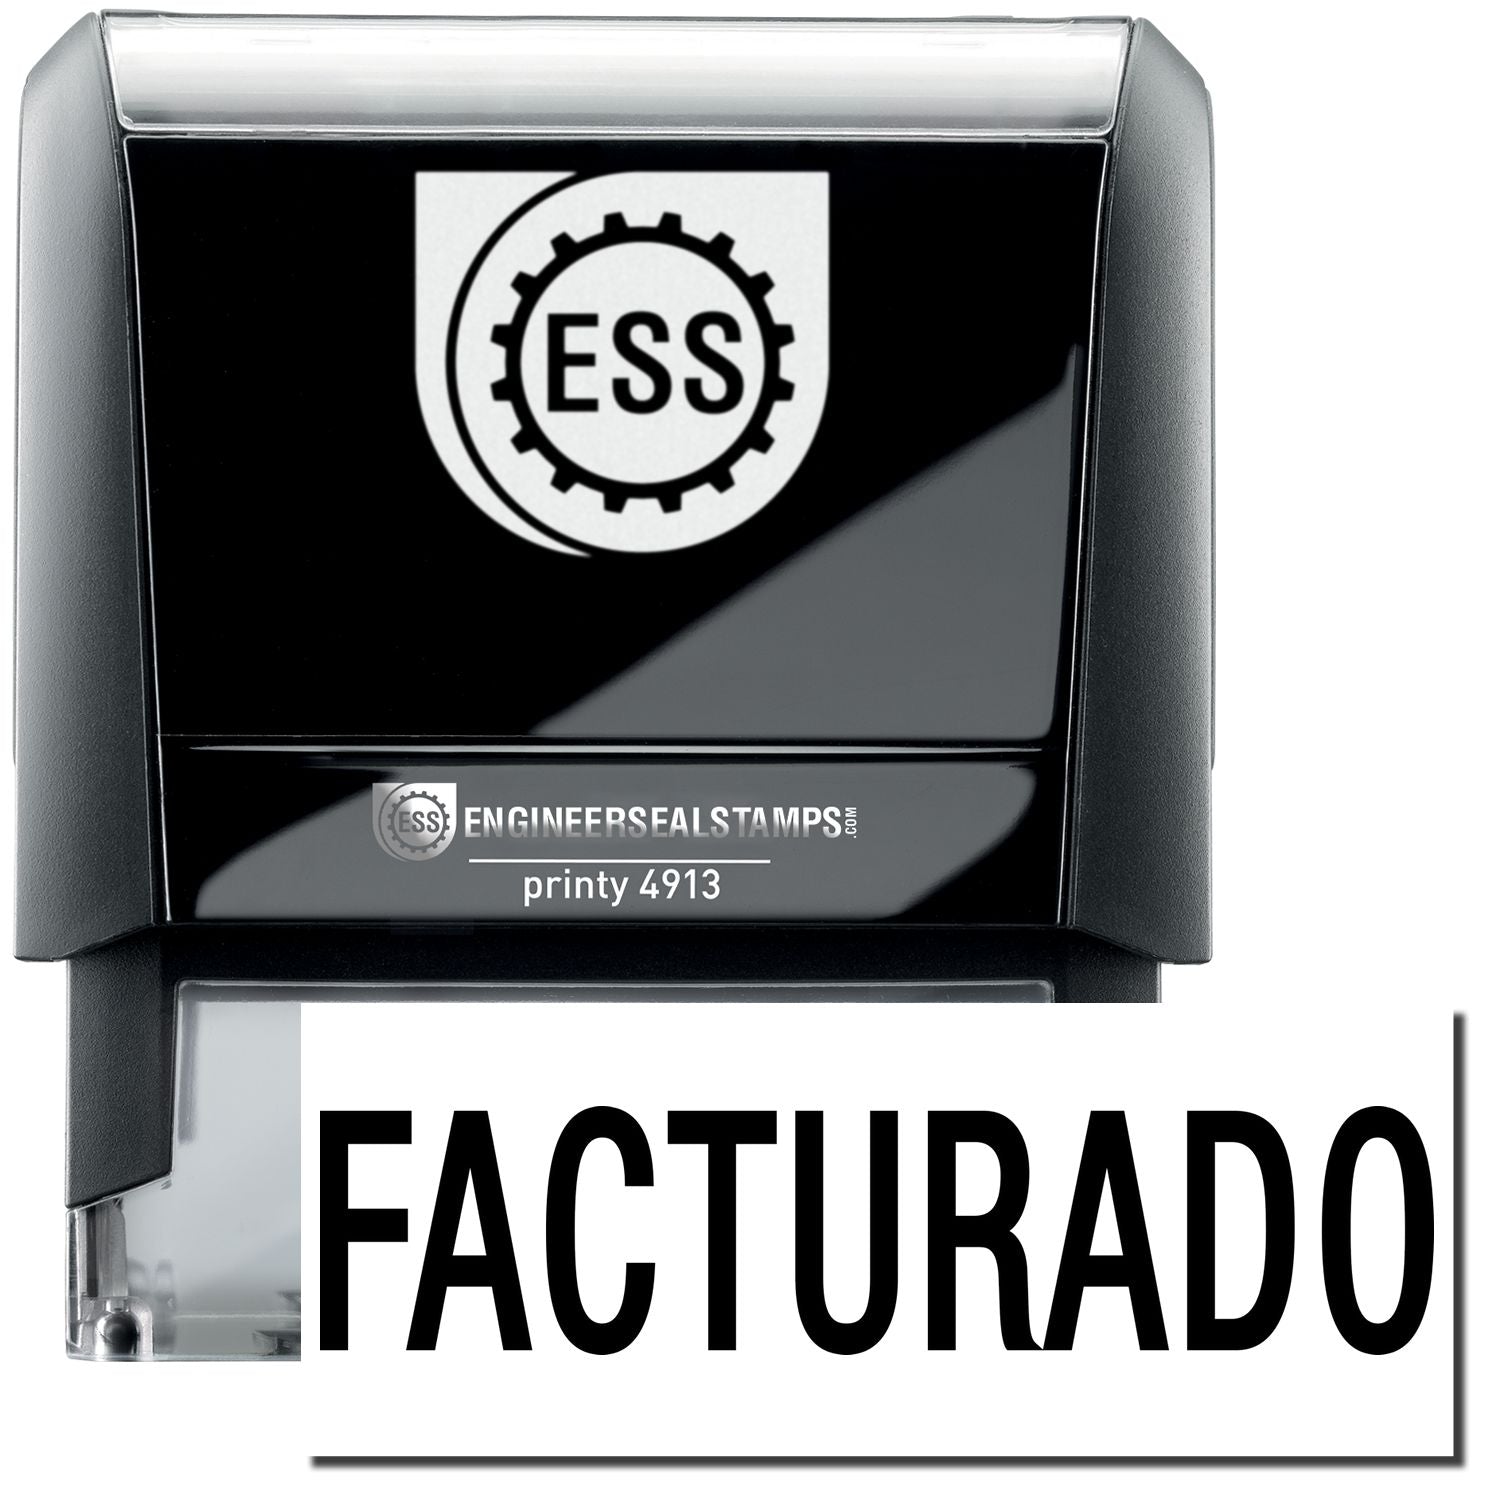 A self-inking stamp with a stamped image showing how the text "FACTURADO" in a large font is displayed by it after stamping.